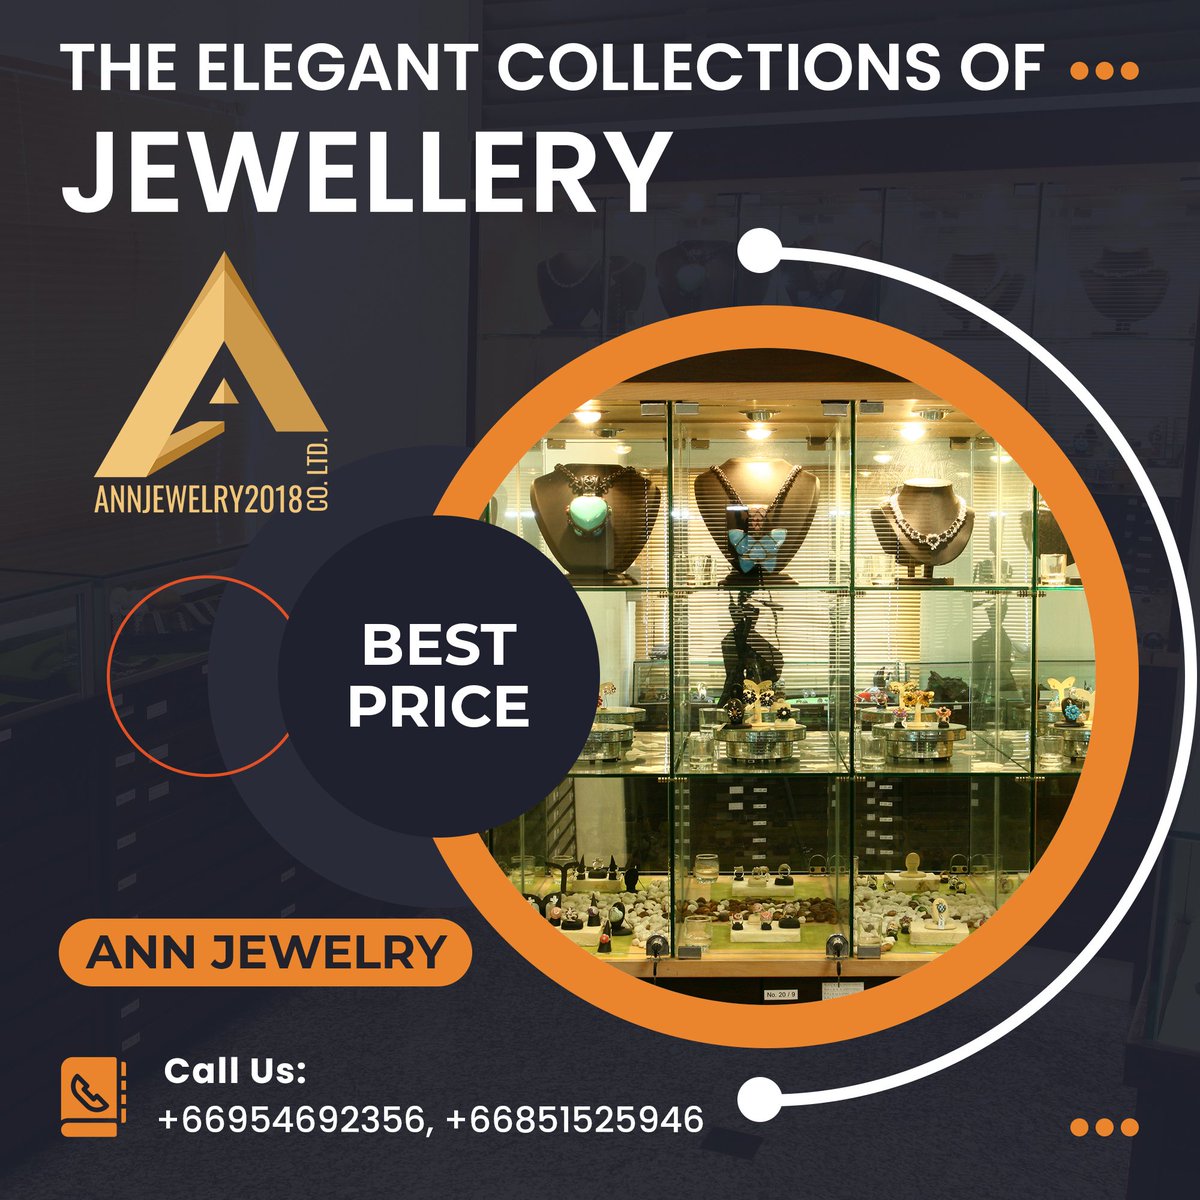 Mix and match different cuts to create a bold, timeless look with designs by Ann Jewelry Designs !!
Contact No : +66954692356
Website : annjewelrydesigns.com
#ThailandWholesaleJewelryManufacturer #ThailandJewelryManufacturers #handmadeJewelryWholesaleThailand 
#bestJewelry